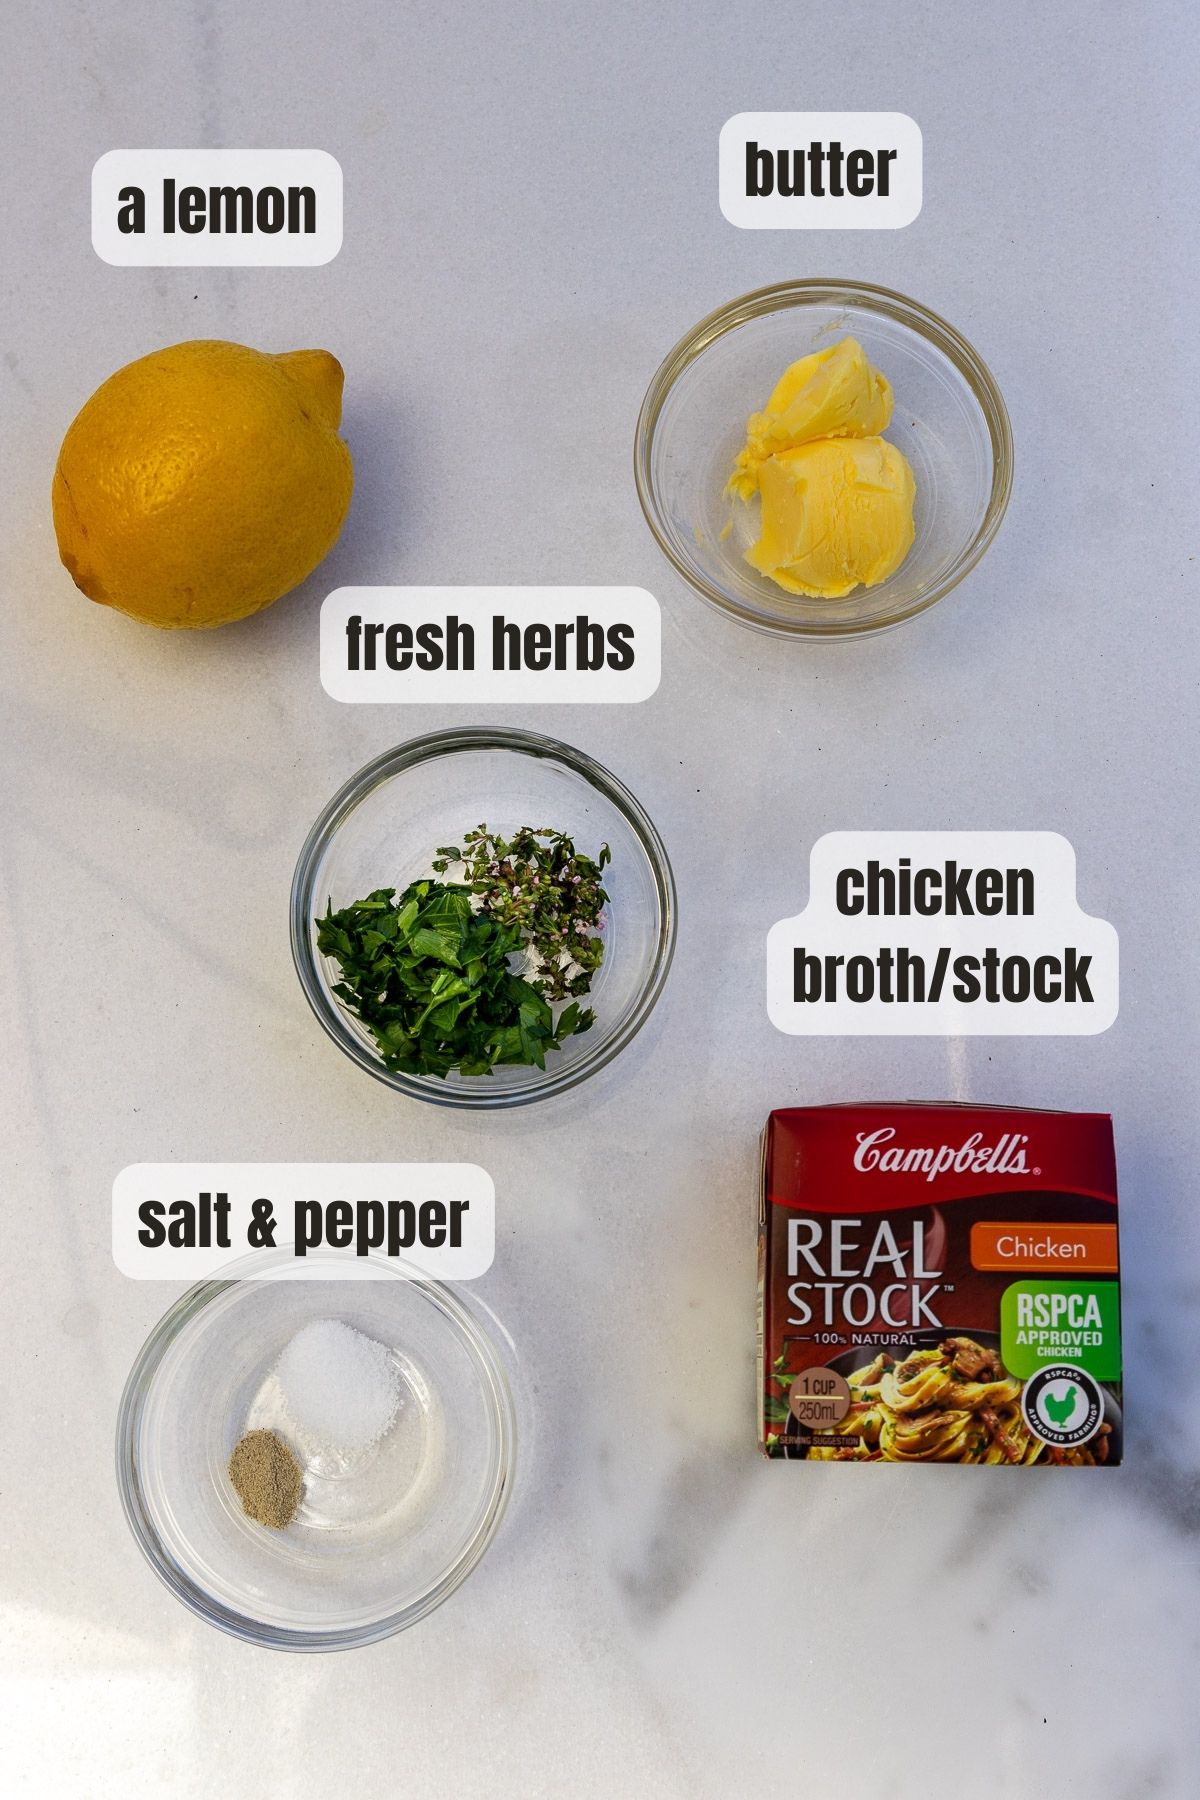 Overhead view of all the ingredients needed to make lemon & butter sauce including a lemon, chicken broth, butter, fresh herbs and salt and pepper.